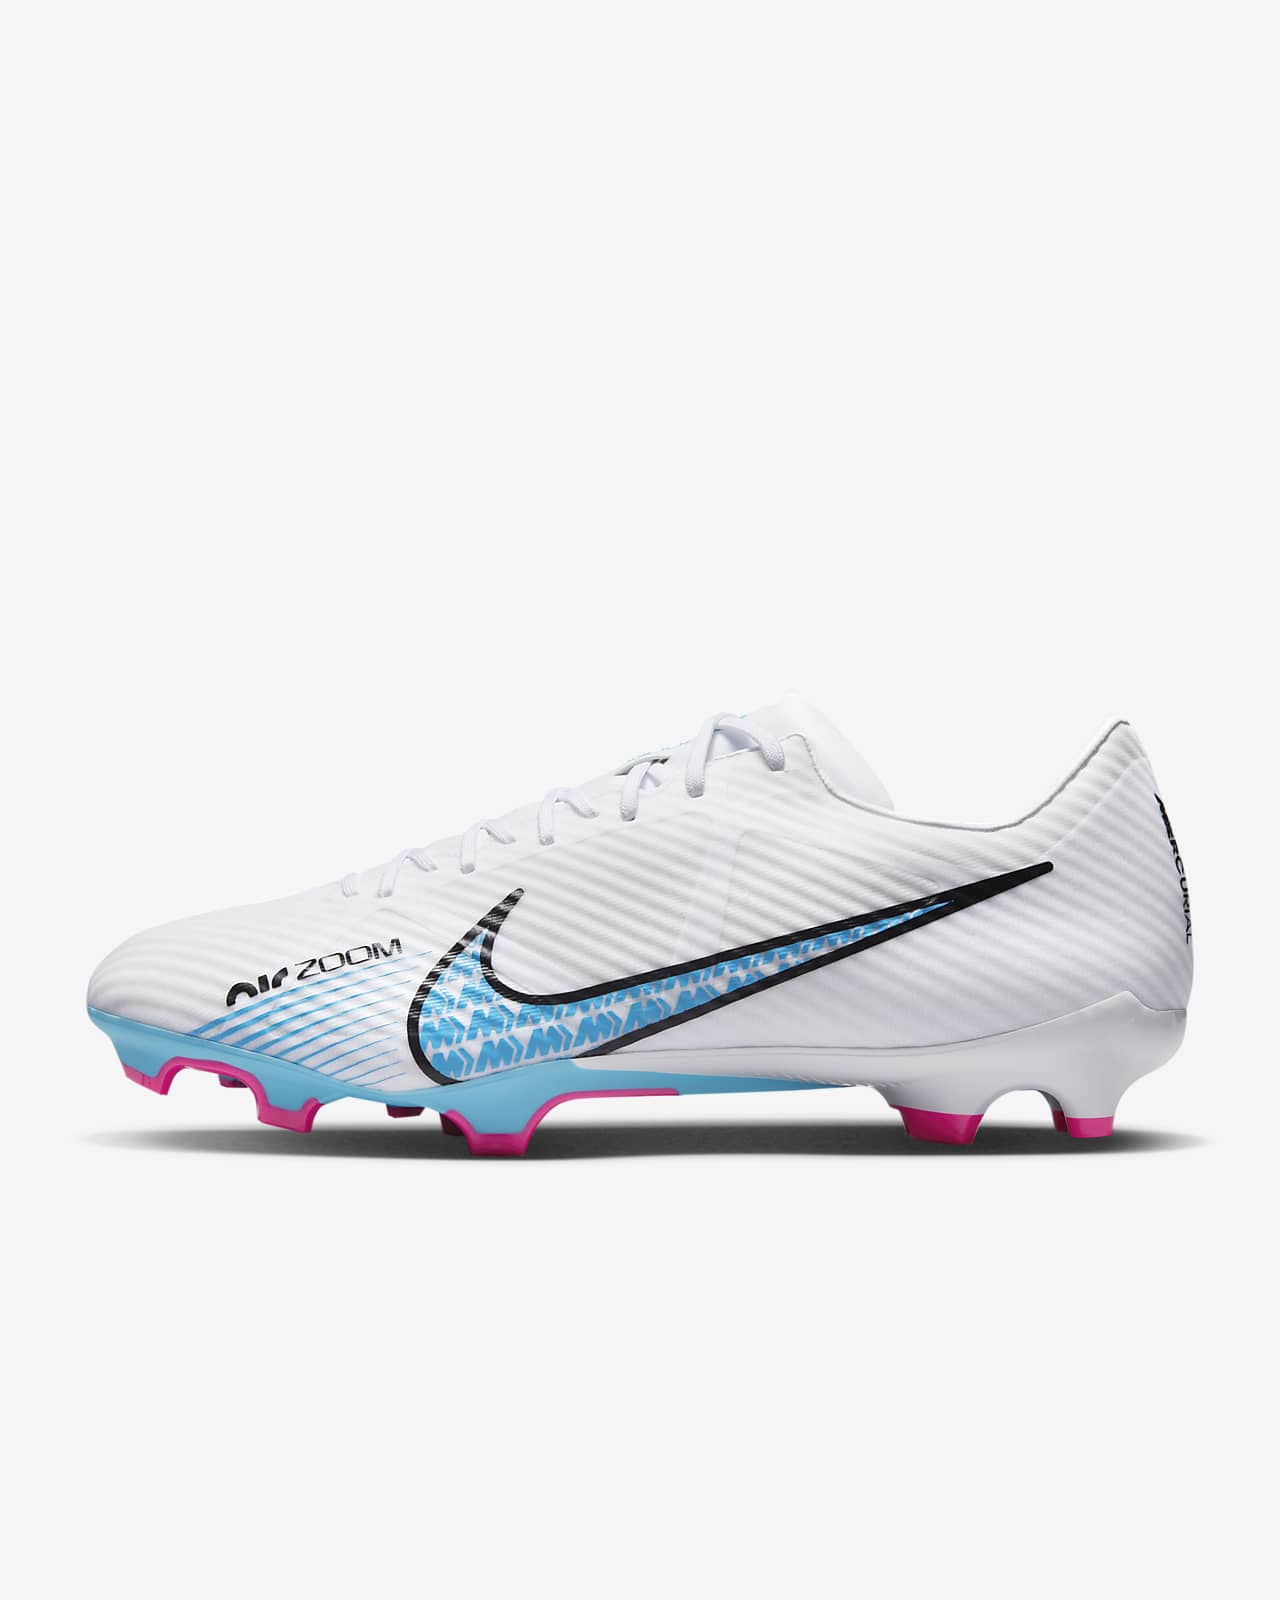 take a picture Discrepancy Write email Nike Mercurial Vapor 15 Academy Multi-Ground Football Boot. Nike UK